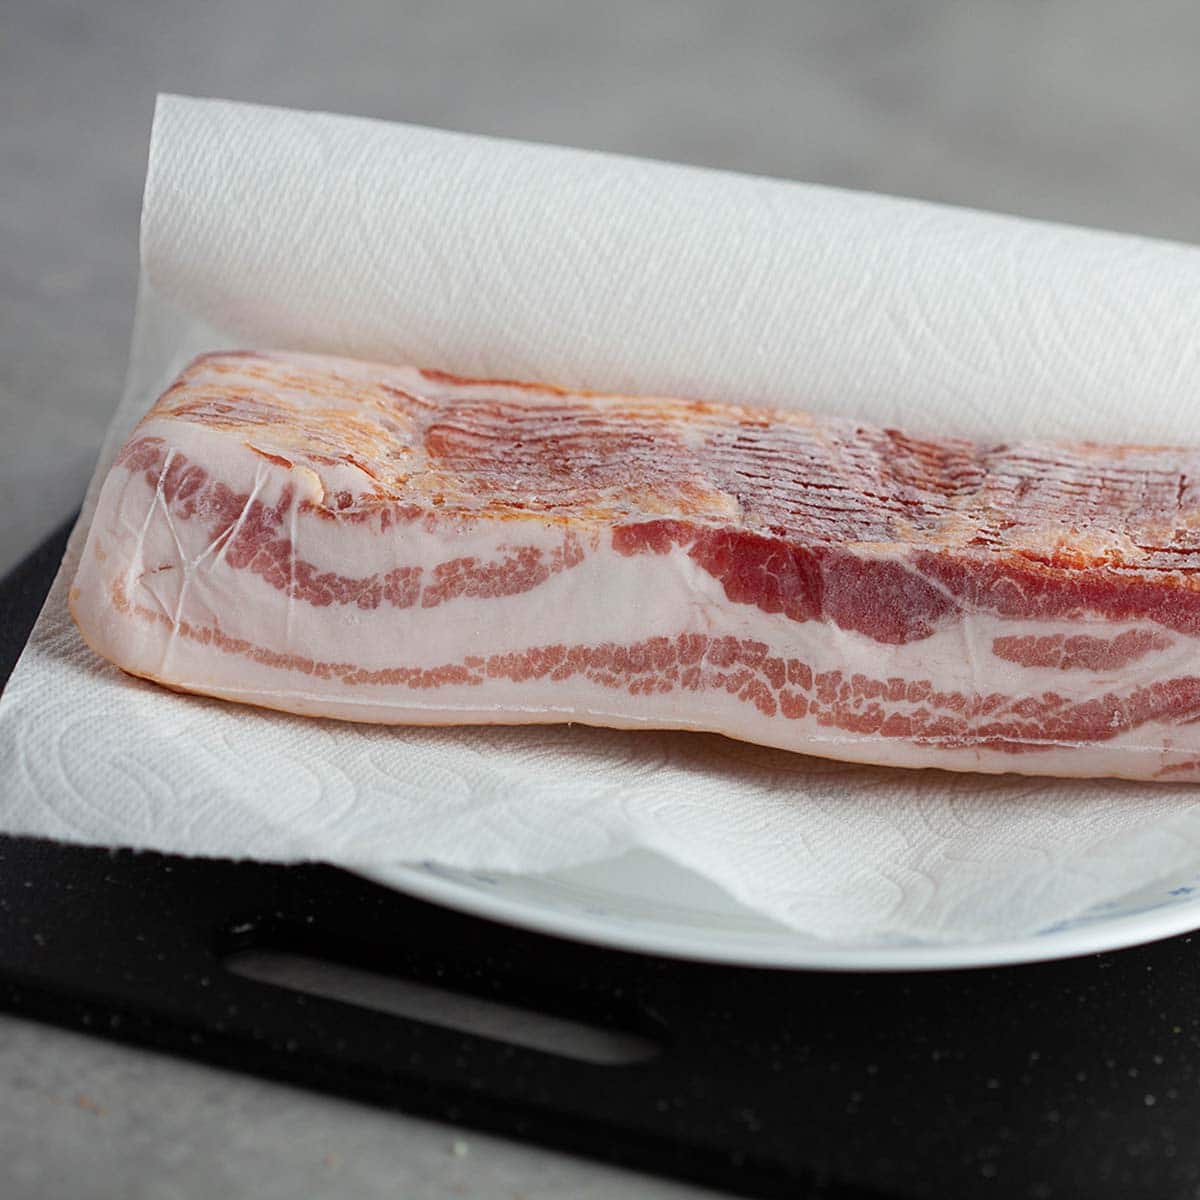 Pre-portioning bacon before you freeze makes it a cinch later when you only want to cook a few slices rather than the entire pack.